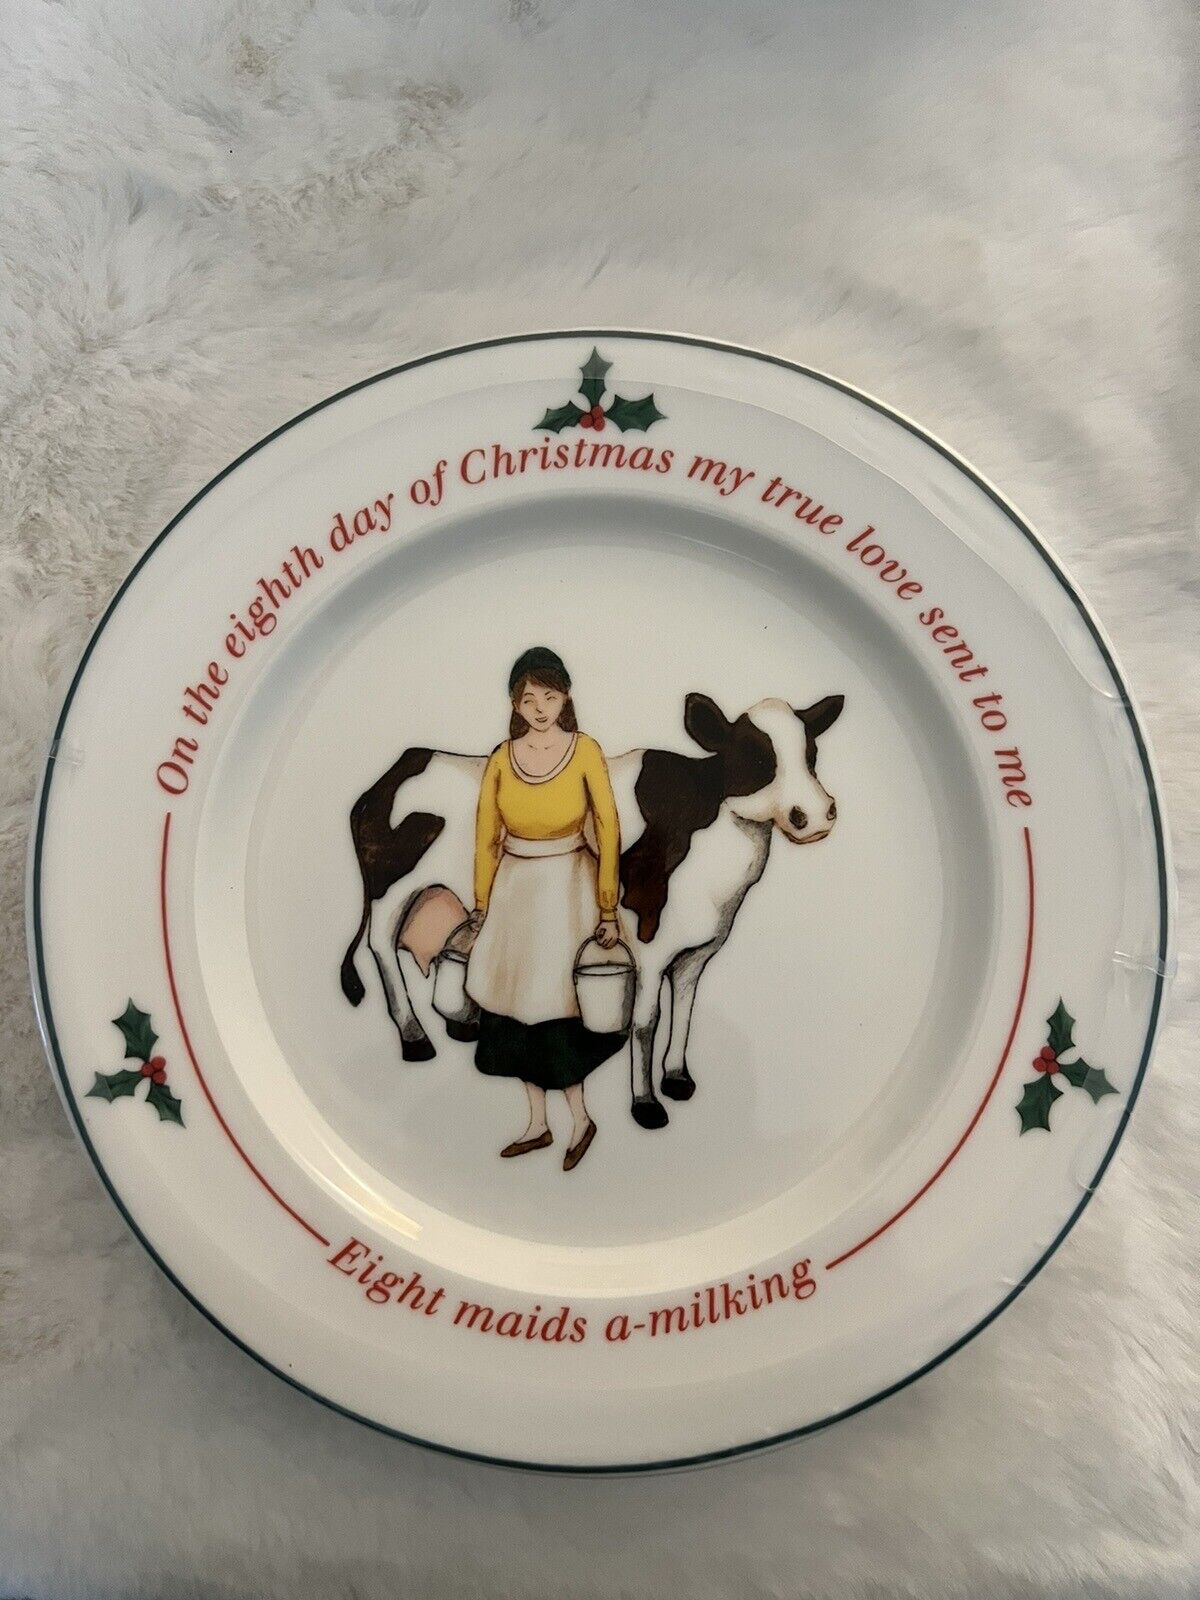 Tuxton On The Eighth day of Christmas milking maid china plate set of 4 NIB